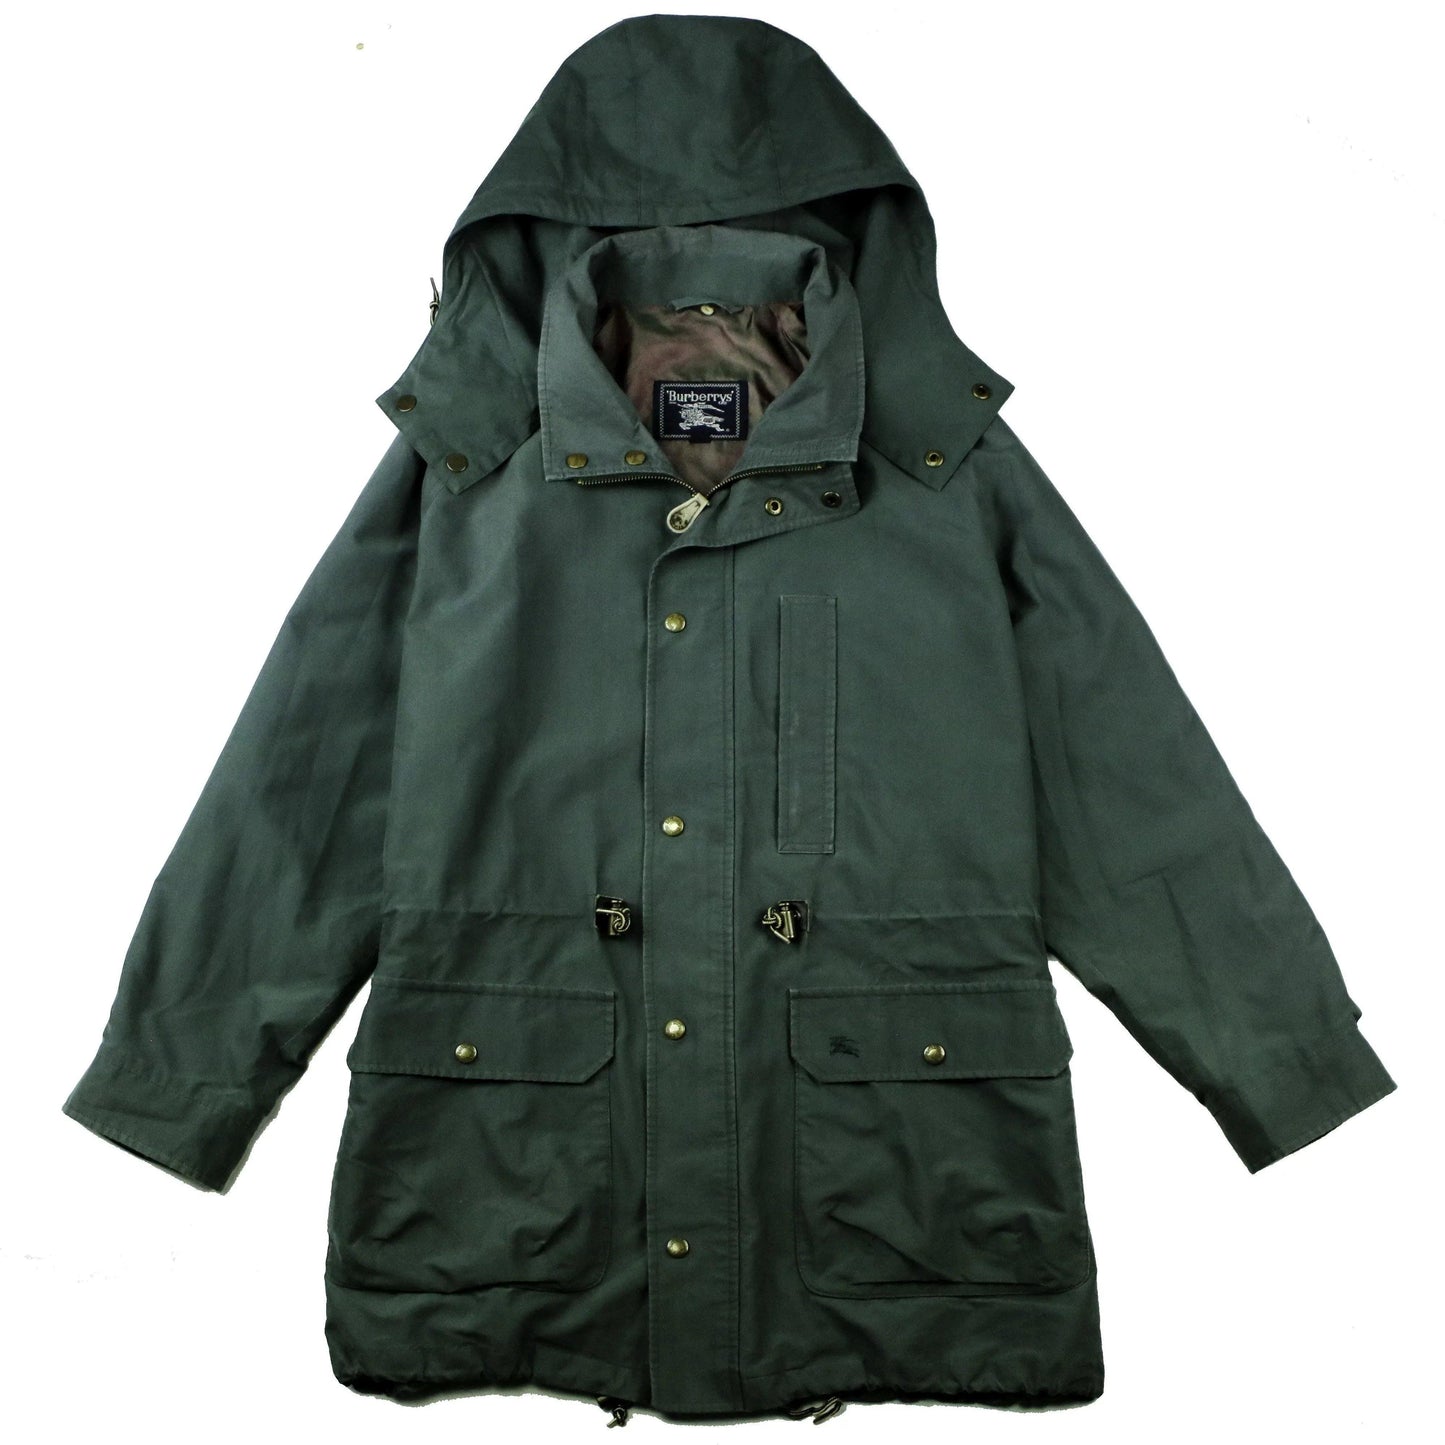 BURBERRY HOODED TRENCH JACKET (L) - Known Source